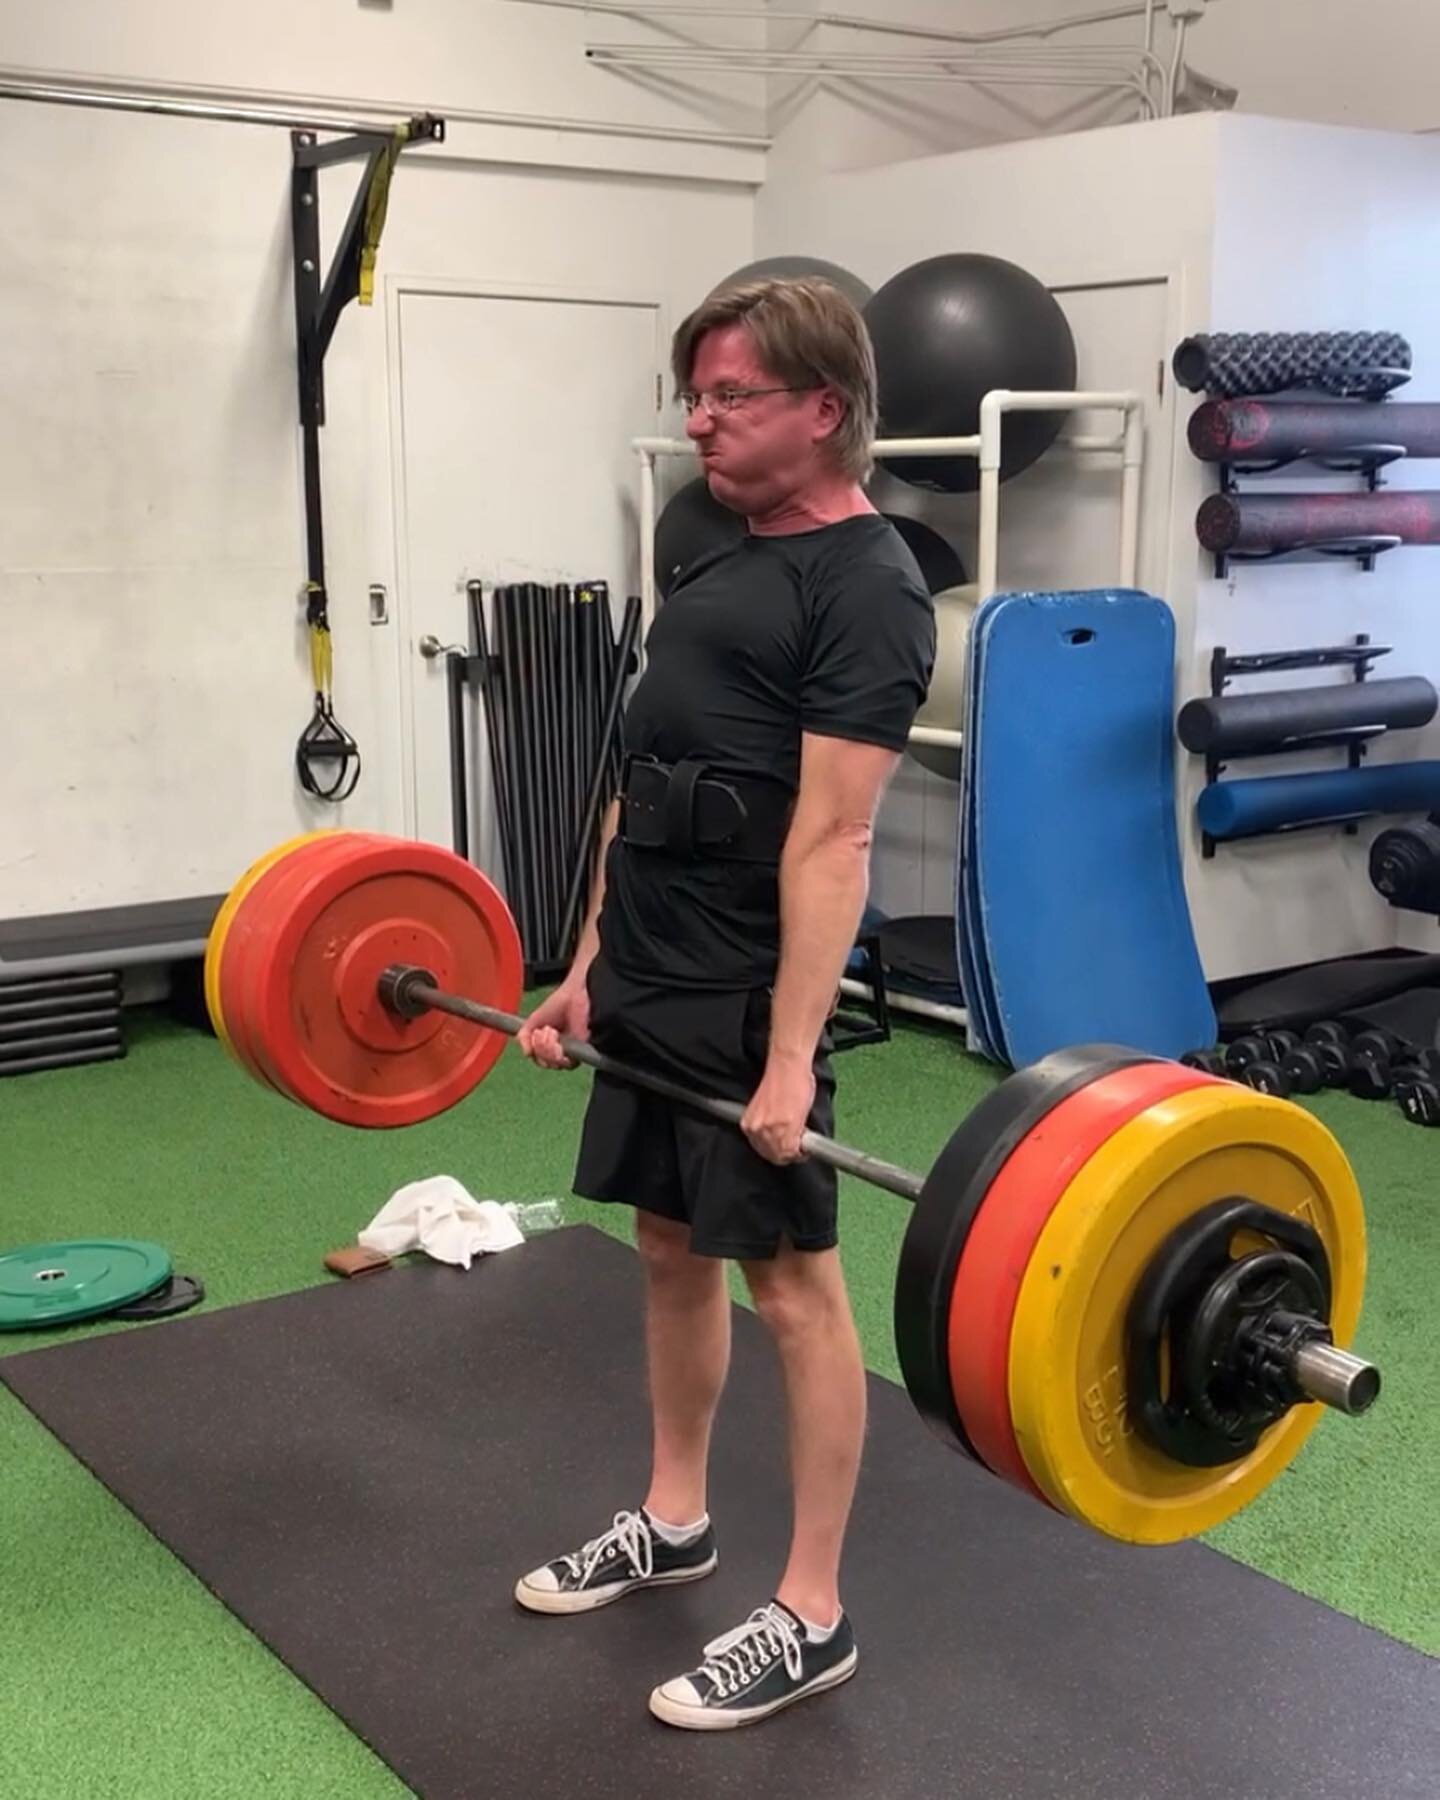 Motivation not required, but when 275# moved up a measly 1&rdquo; and then my bud Tyran came in, I made that 275# go up and down 4 times. Determination required. 

Lifting is a mindset, and when you surround yourself with others pursuing excellence, 